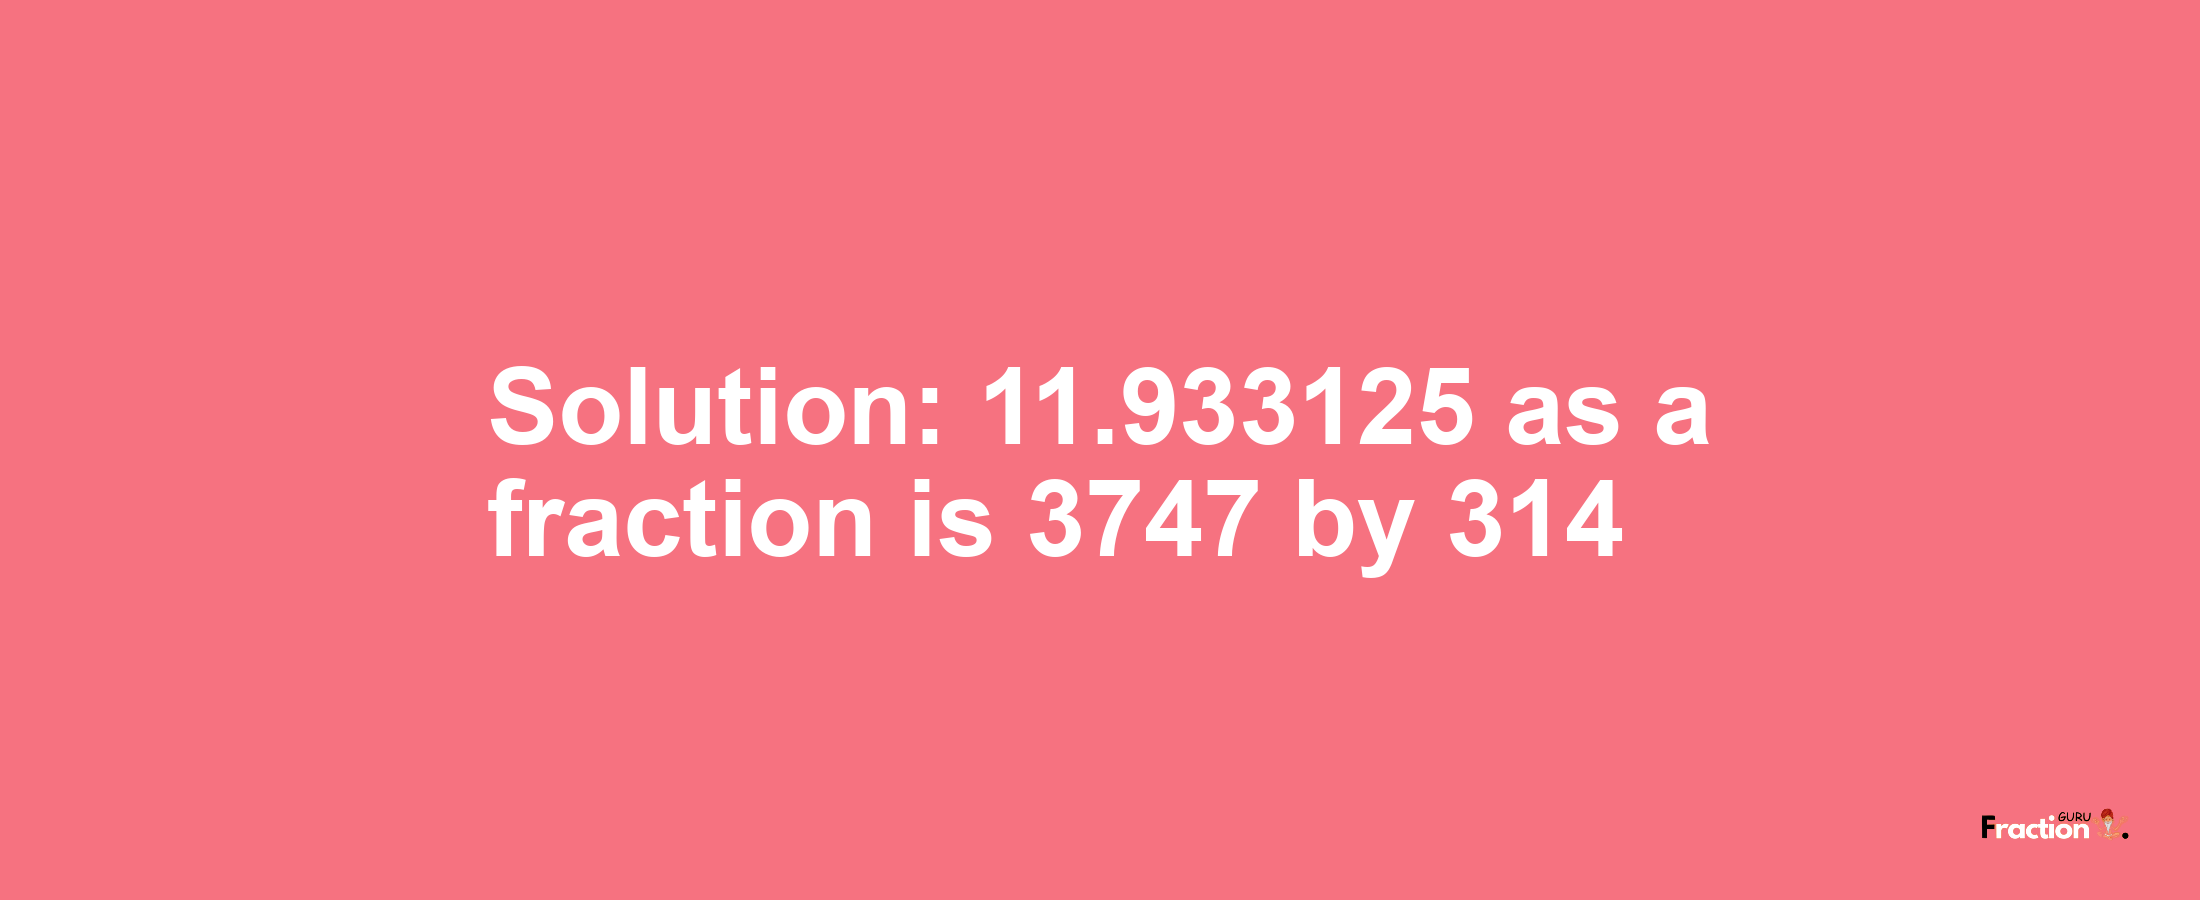 Solution:11.933125 as a fraction is 3747/314